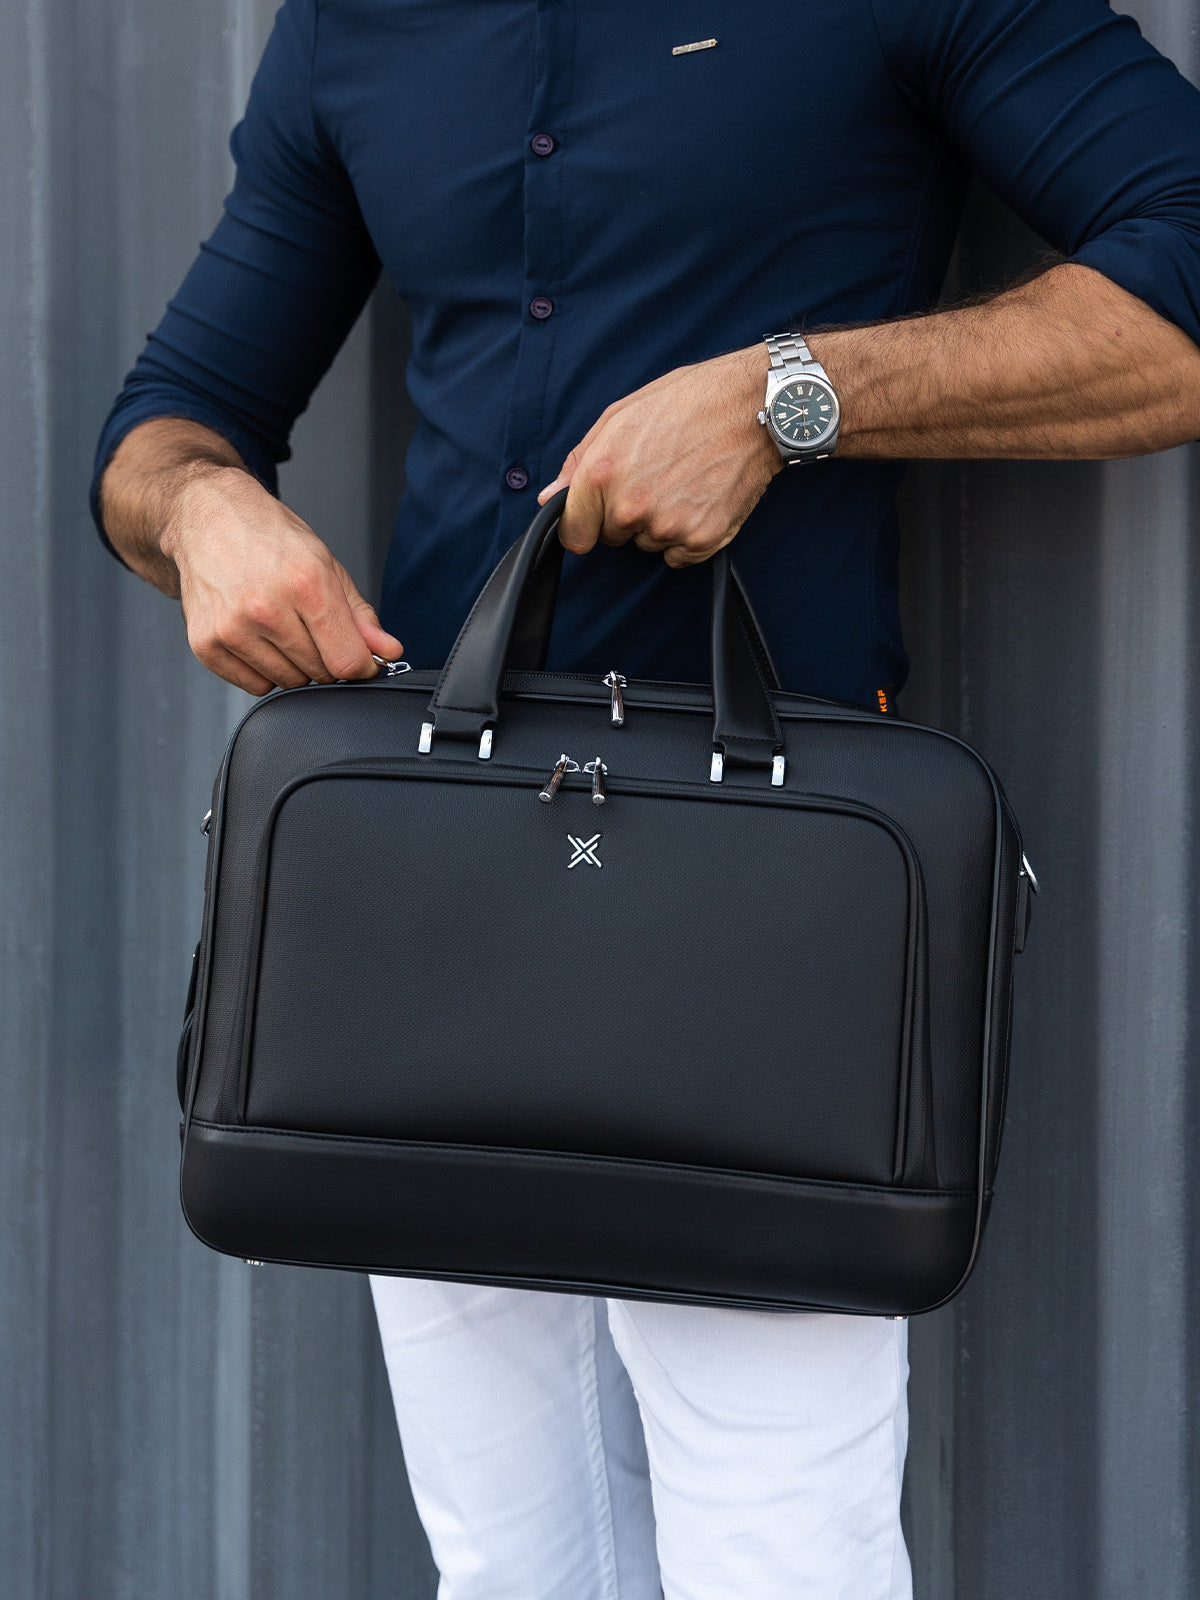 How to Choose the Right Size Leather Briefcase for Your Need